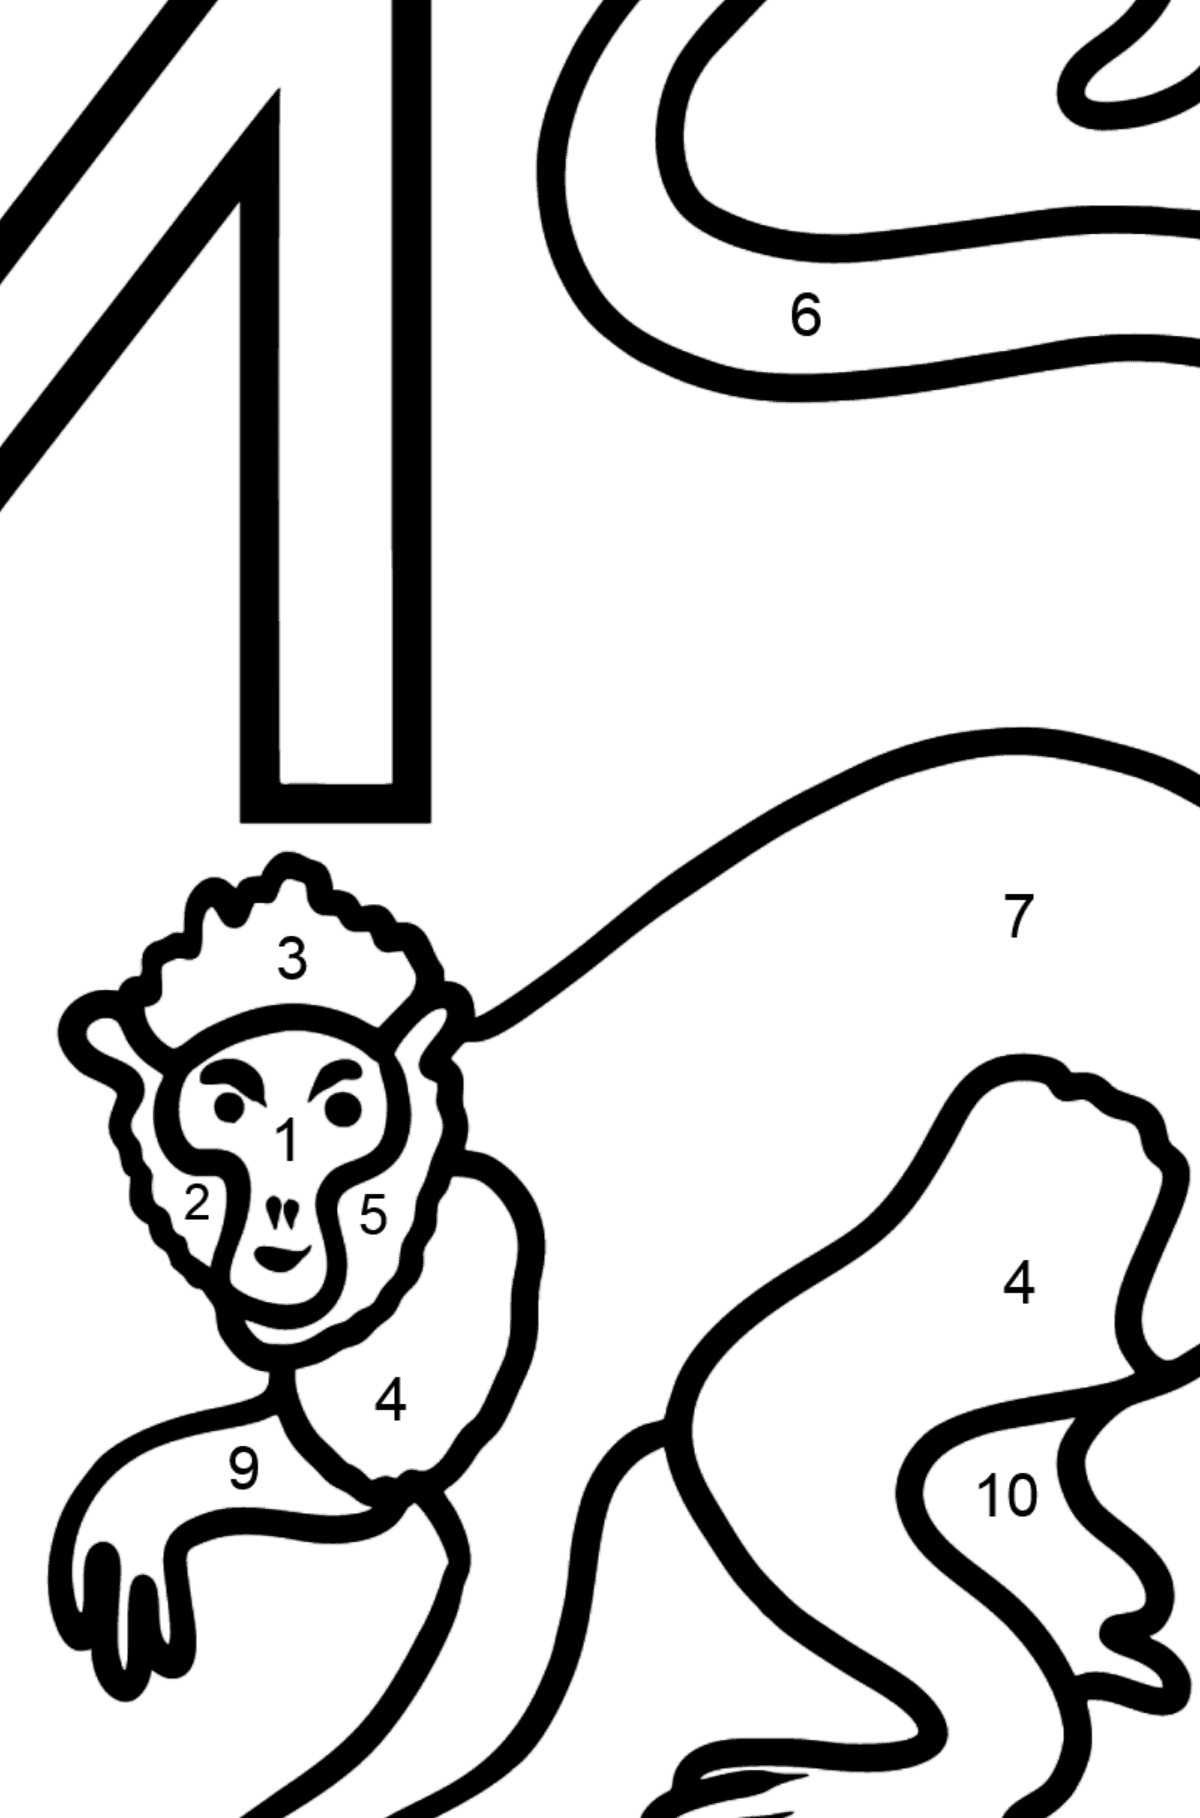 Portuguese Letter M coloring pages - MACACO - Coloring by Numbers for Kids